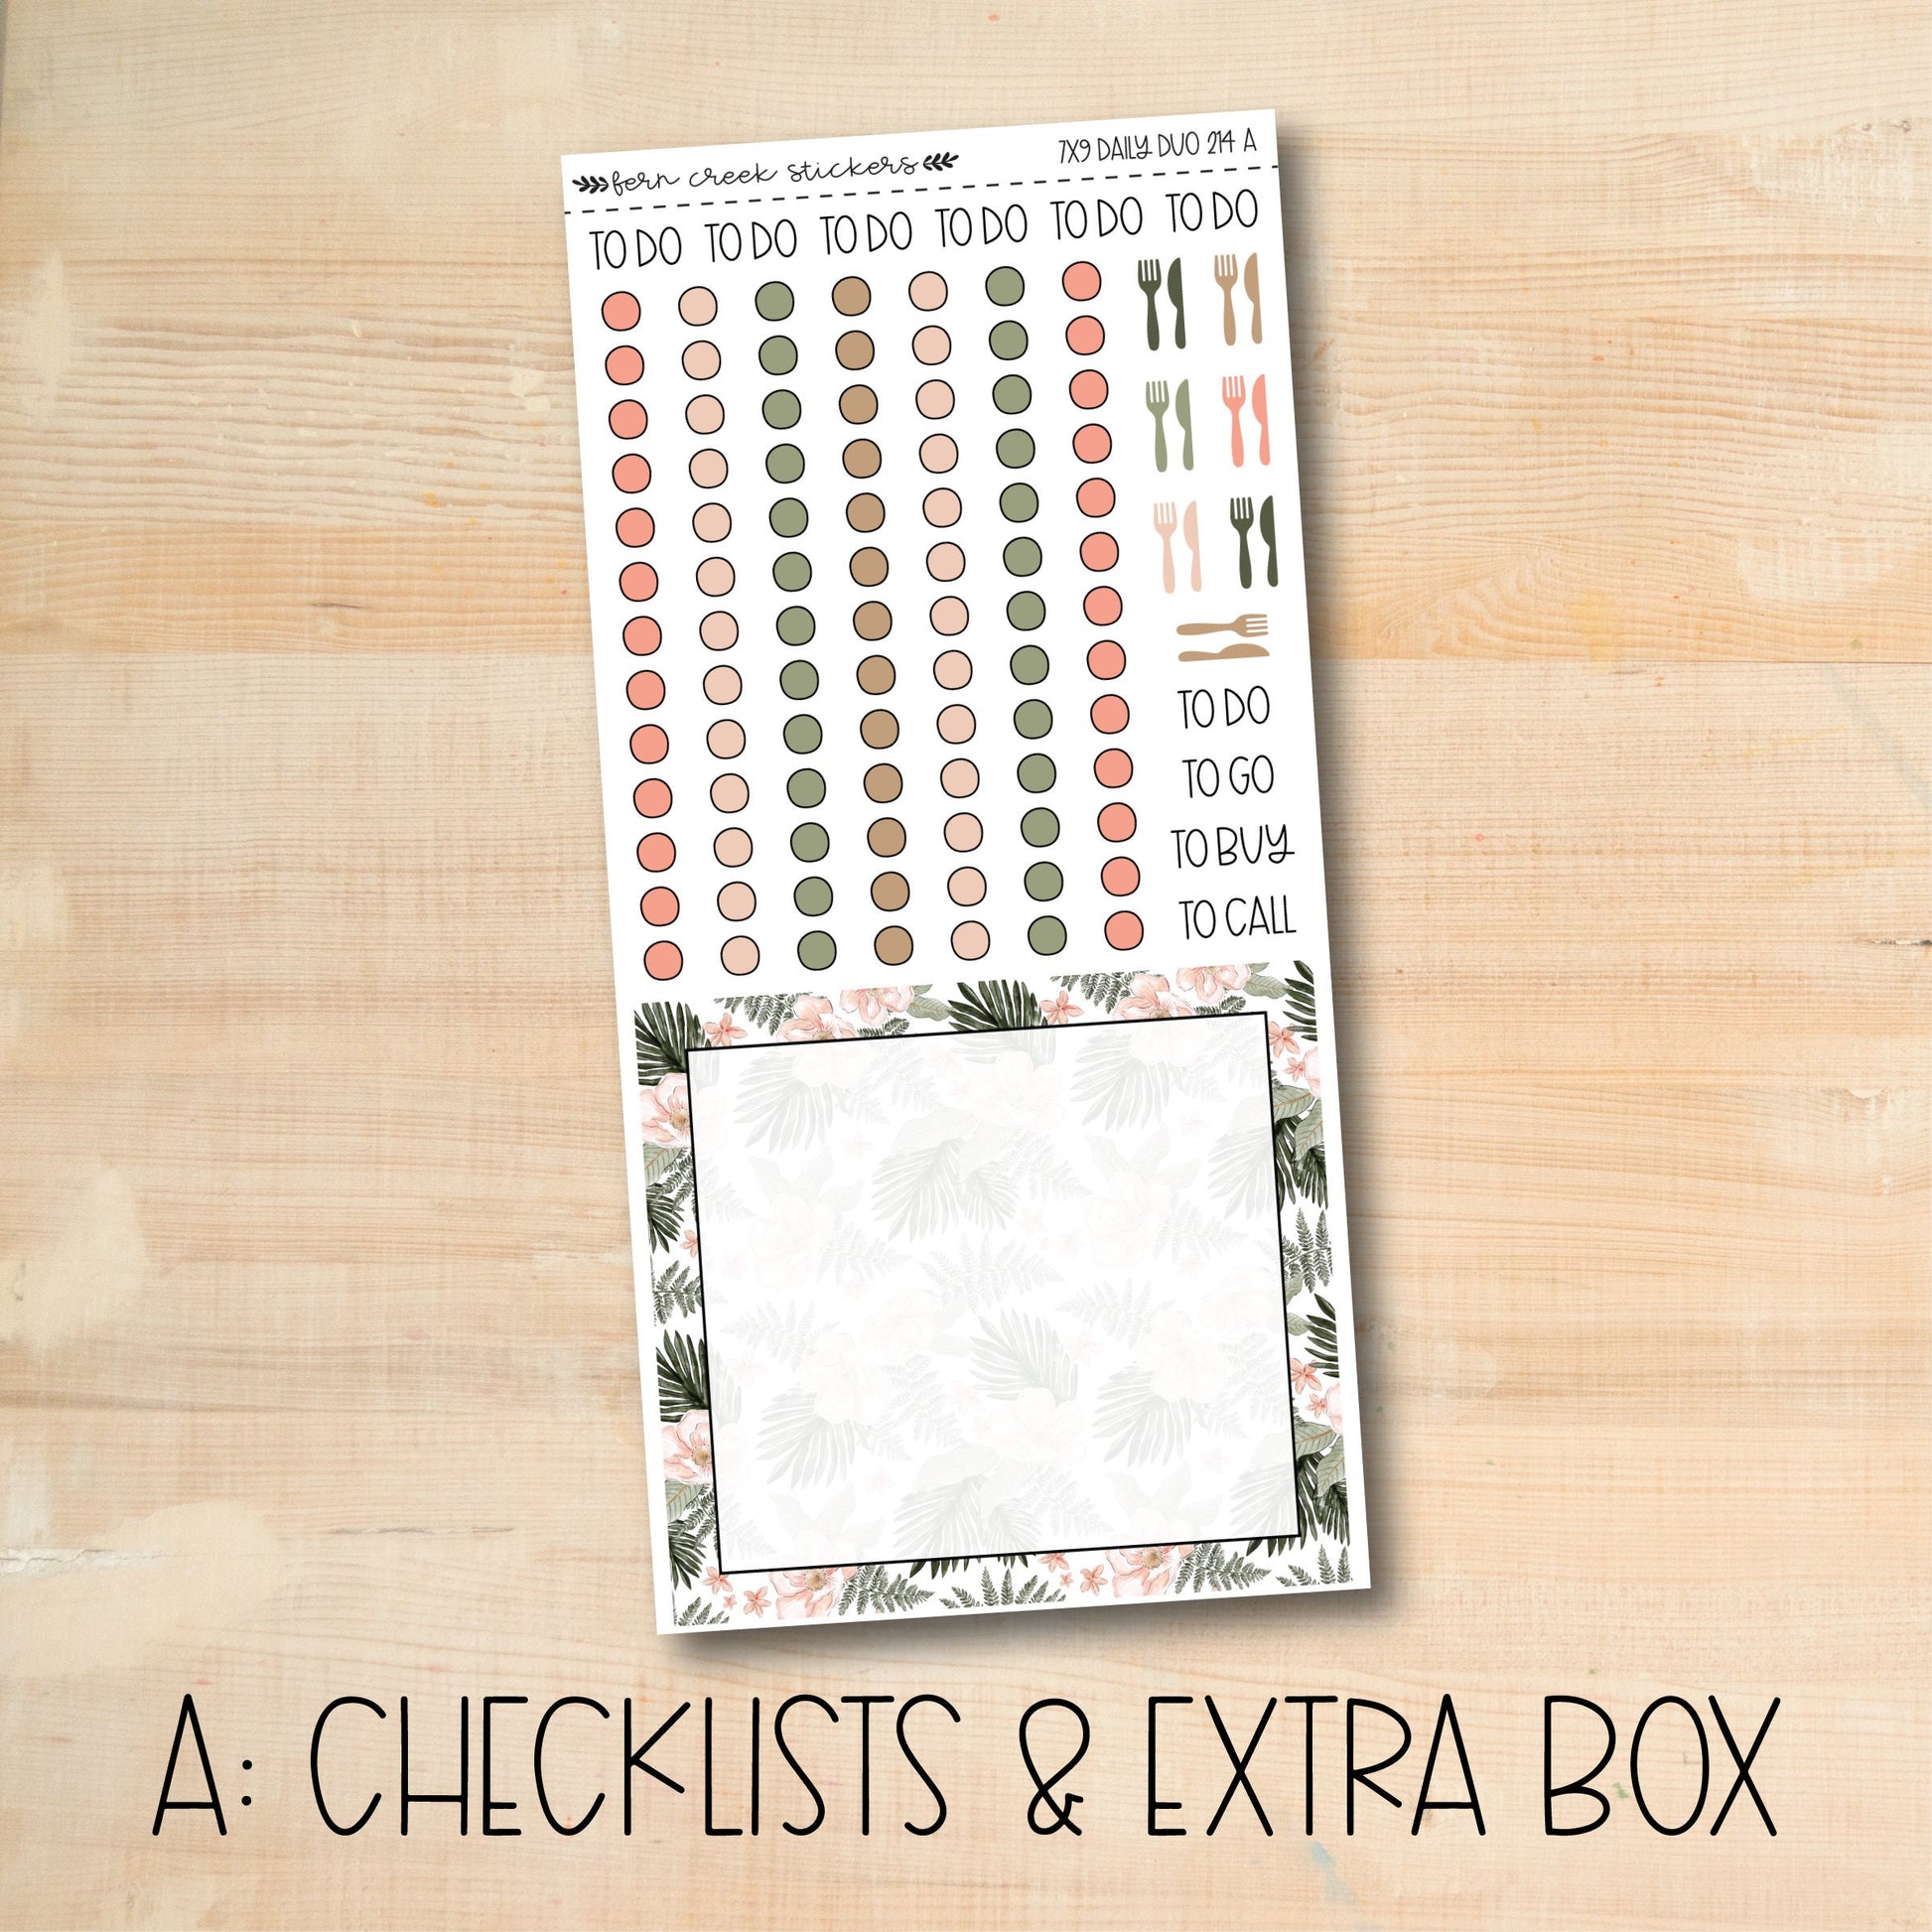 a checklist and extra box of stickers on a wooden surface